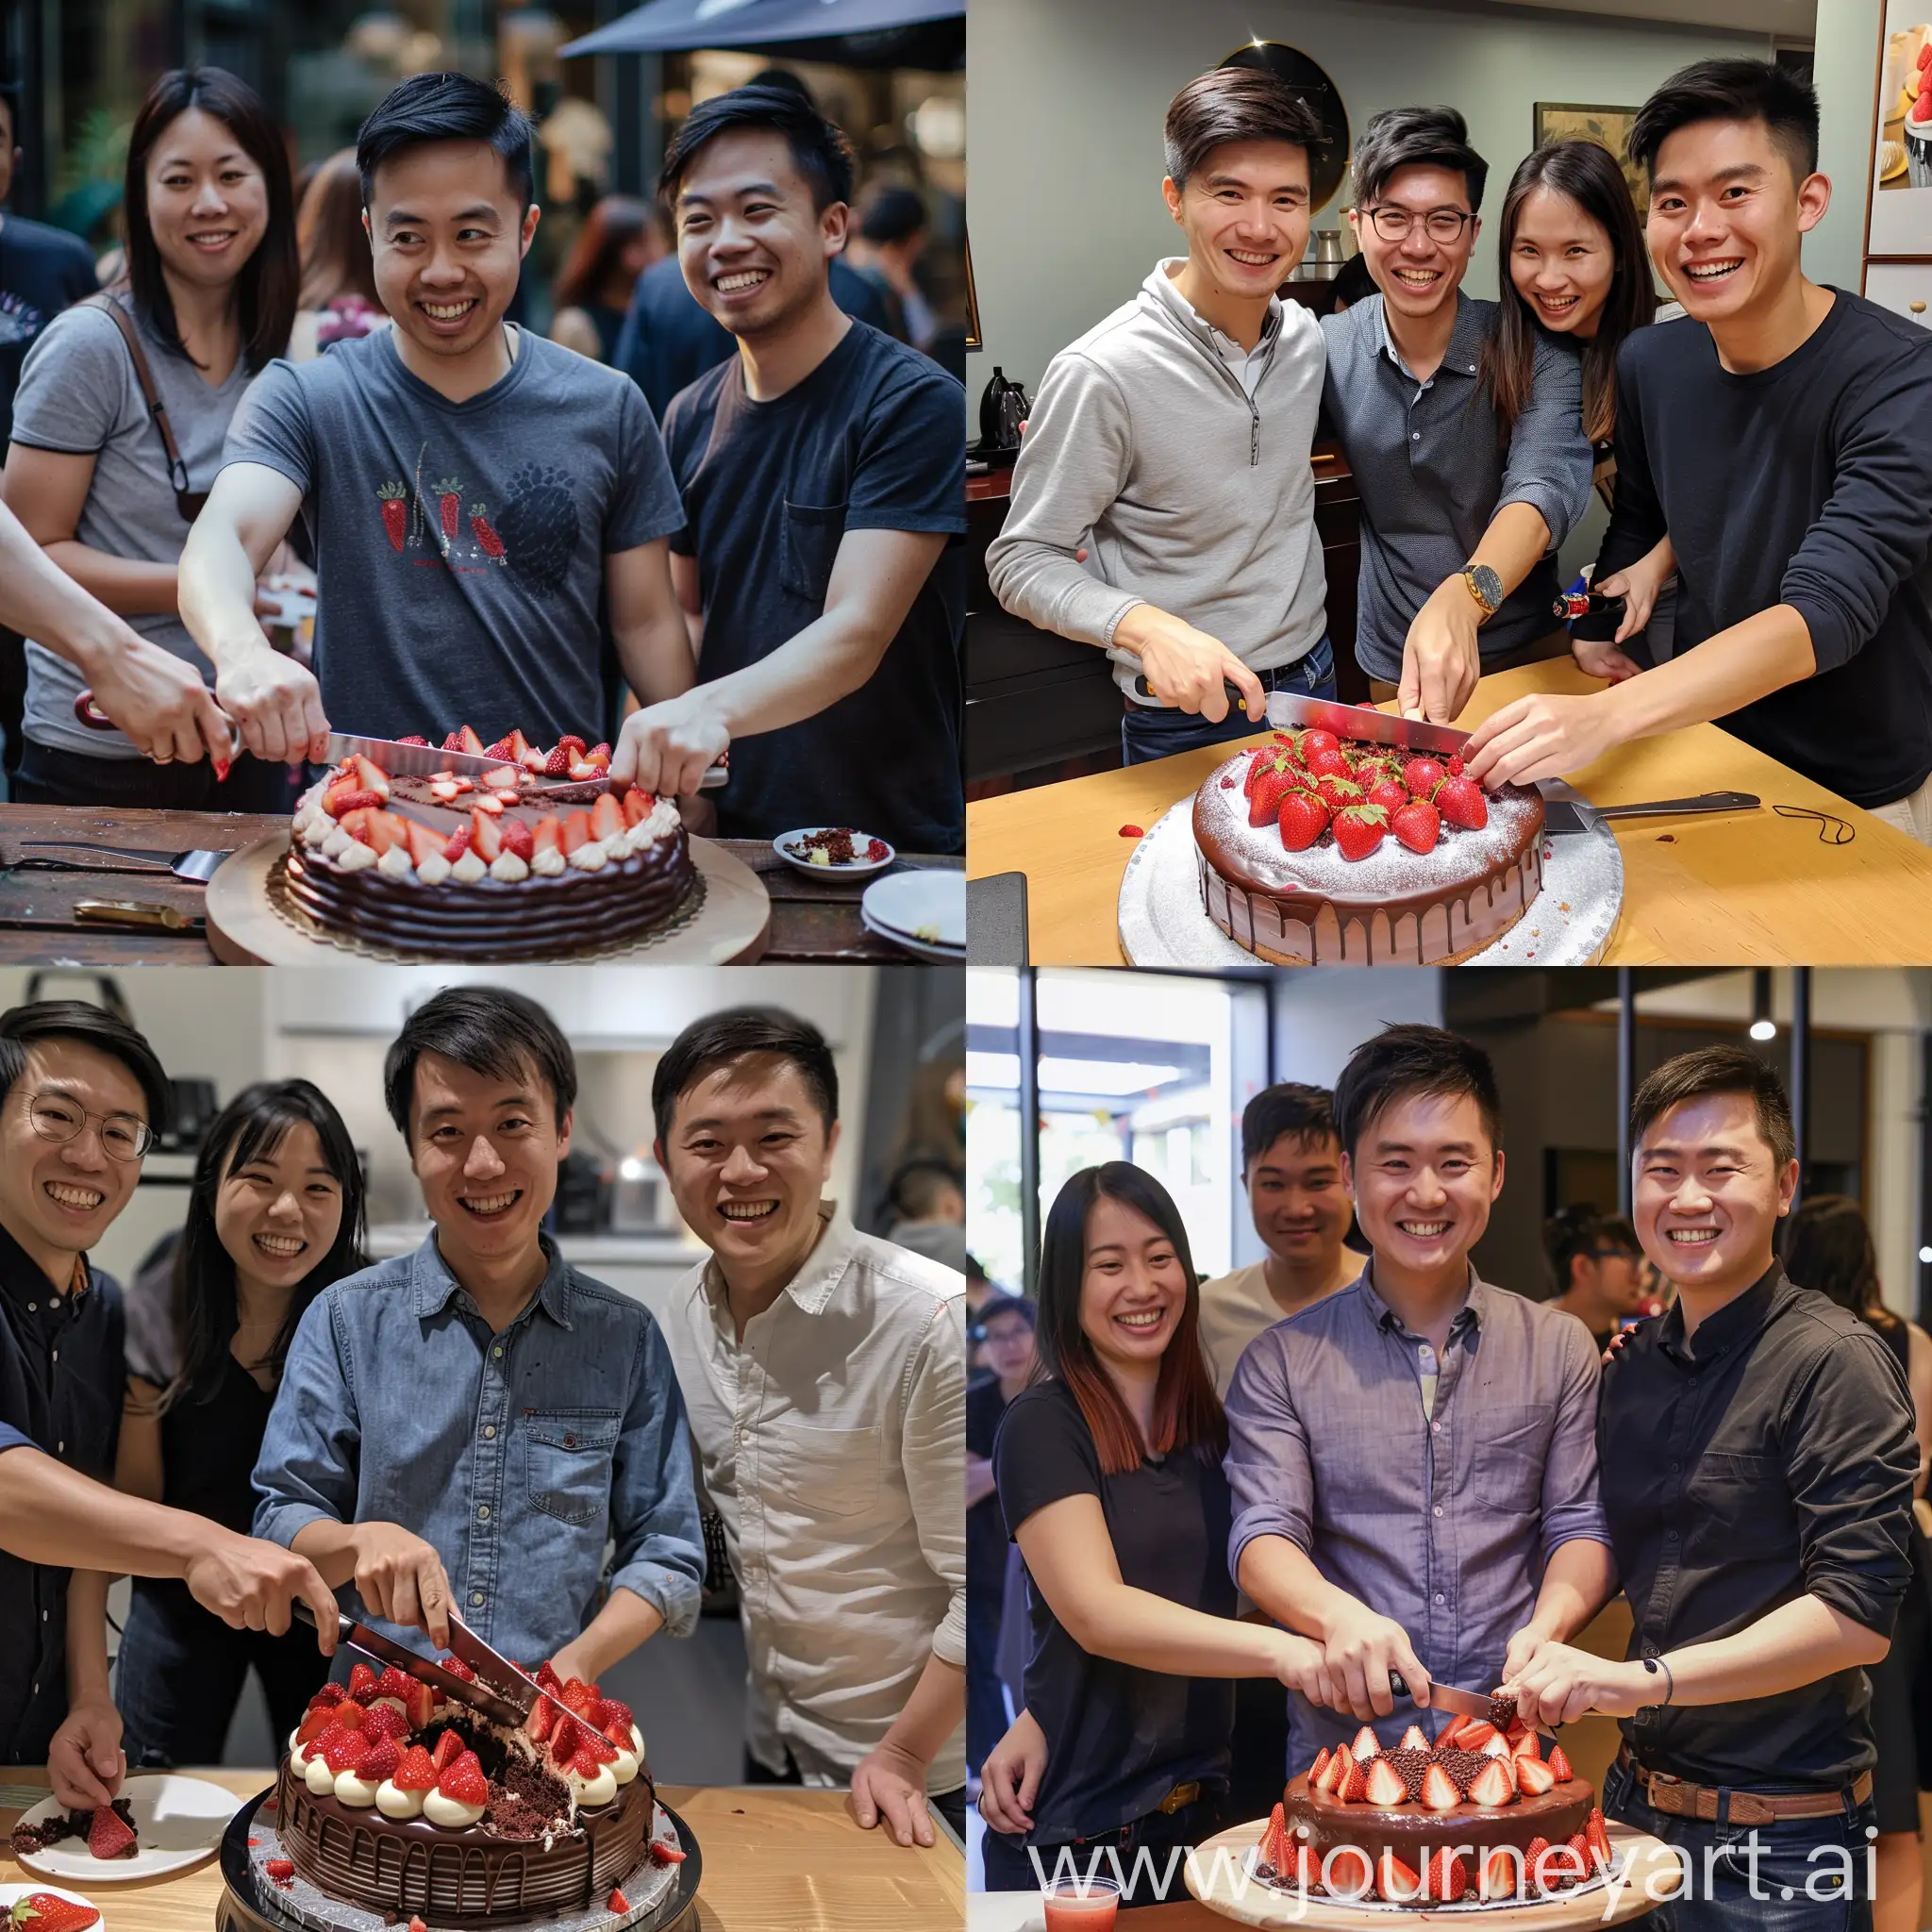 Group photo of 3 asian males and 1 asian female at a birthday where the guy cuts a strawberry chocolate cake 